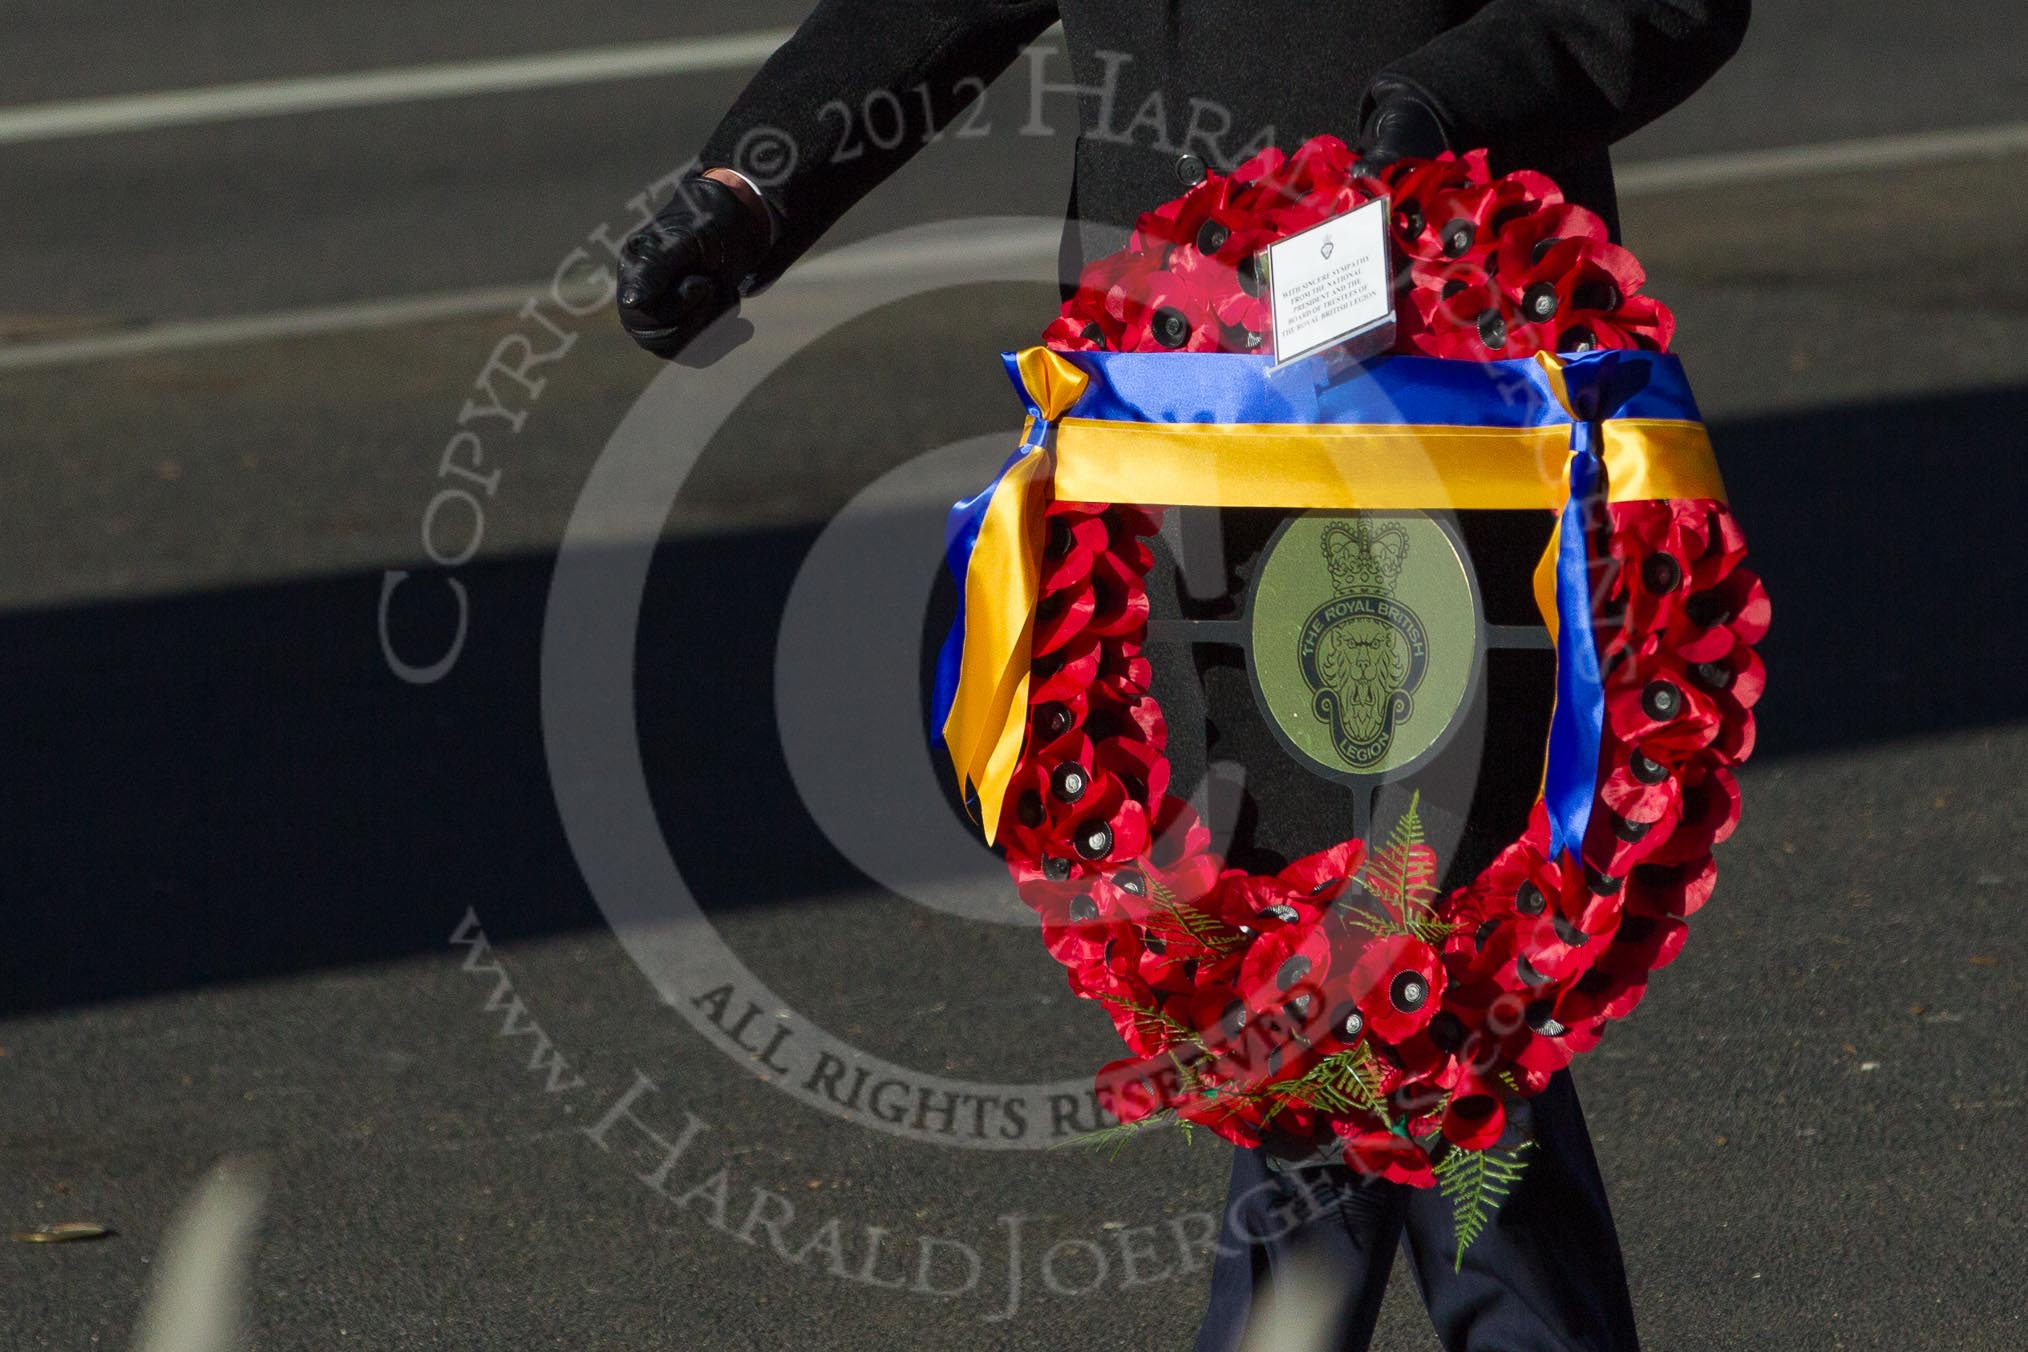 Remembrance Sunday 2012 Cenotaph March Past: The wreath to be laid by the Vice-Admiral Wilkinson. "With sincere sympathy from the National President and the Board of Trustees of the Royal British Legion"..
Whitehall, Cenotaph,
London SW1,

United Kingdom,
on 11 November 2012 at 11:27, image #7